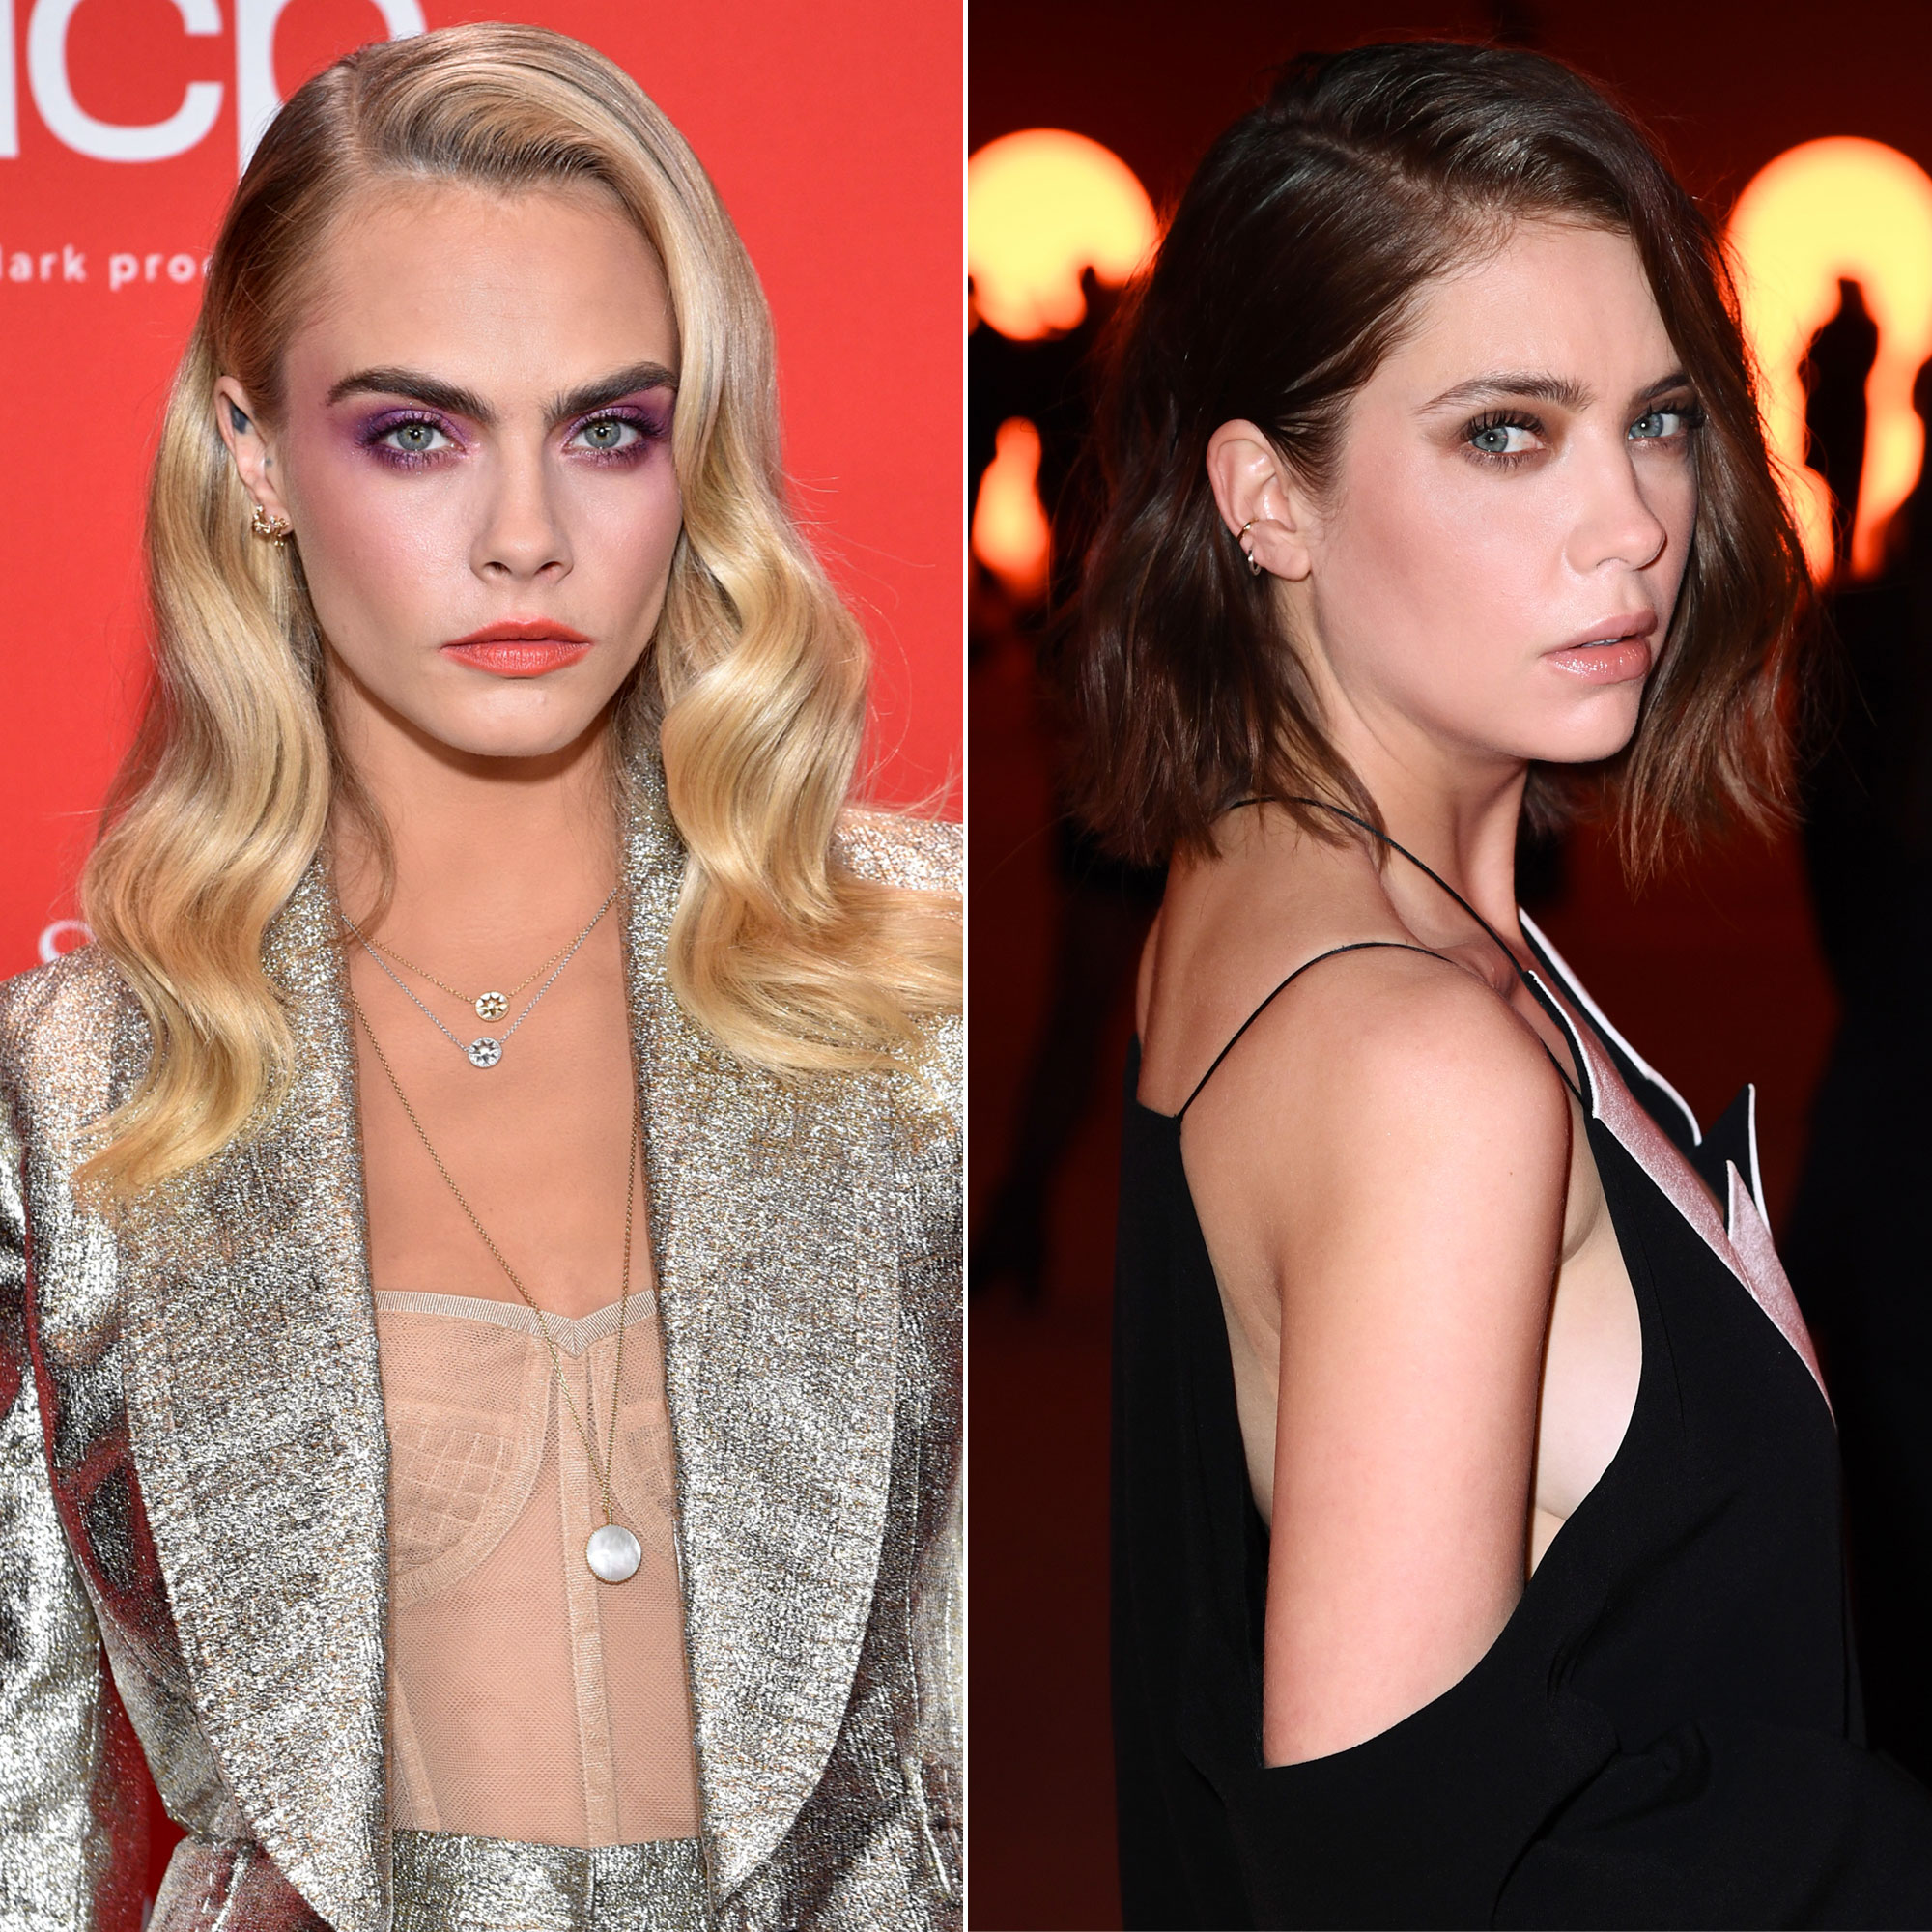 Cara Delevingne Reacts to Sex Bench Pics With Ashley Benson